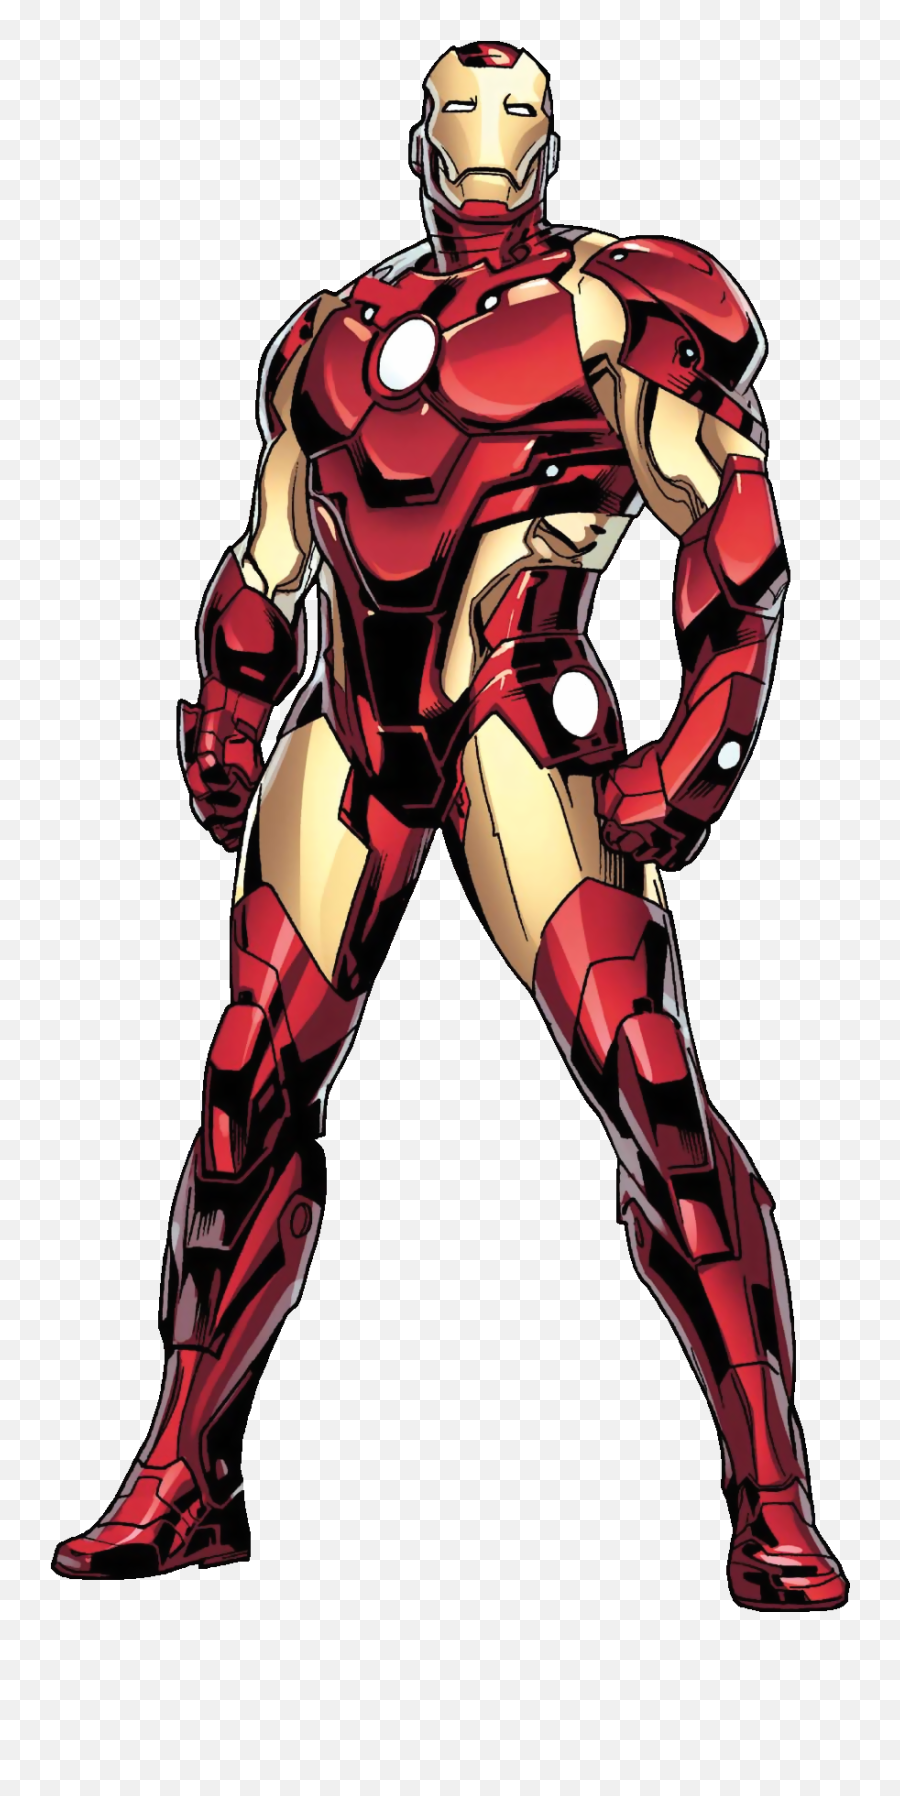 Ironman Avengers Png Image For Free - Iron Man Marvel Comics,Avengers Png